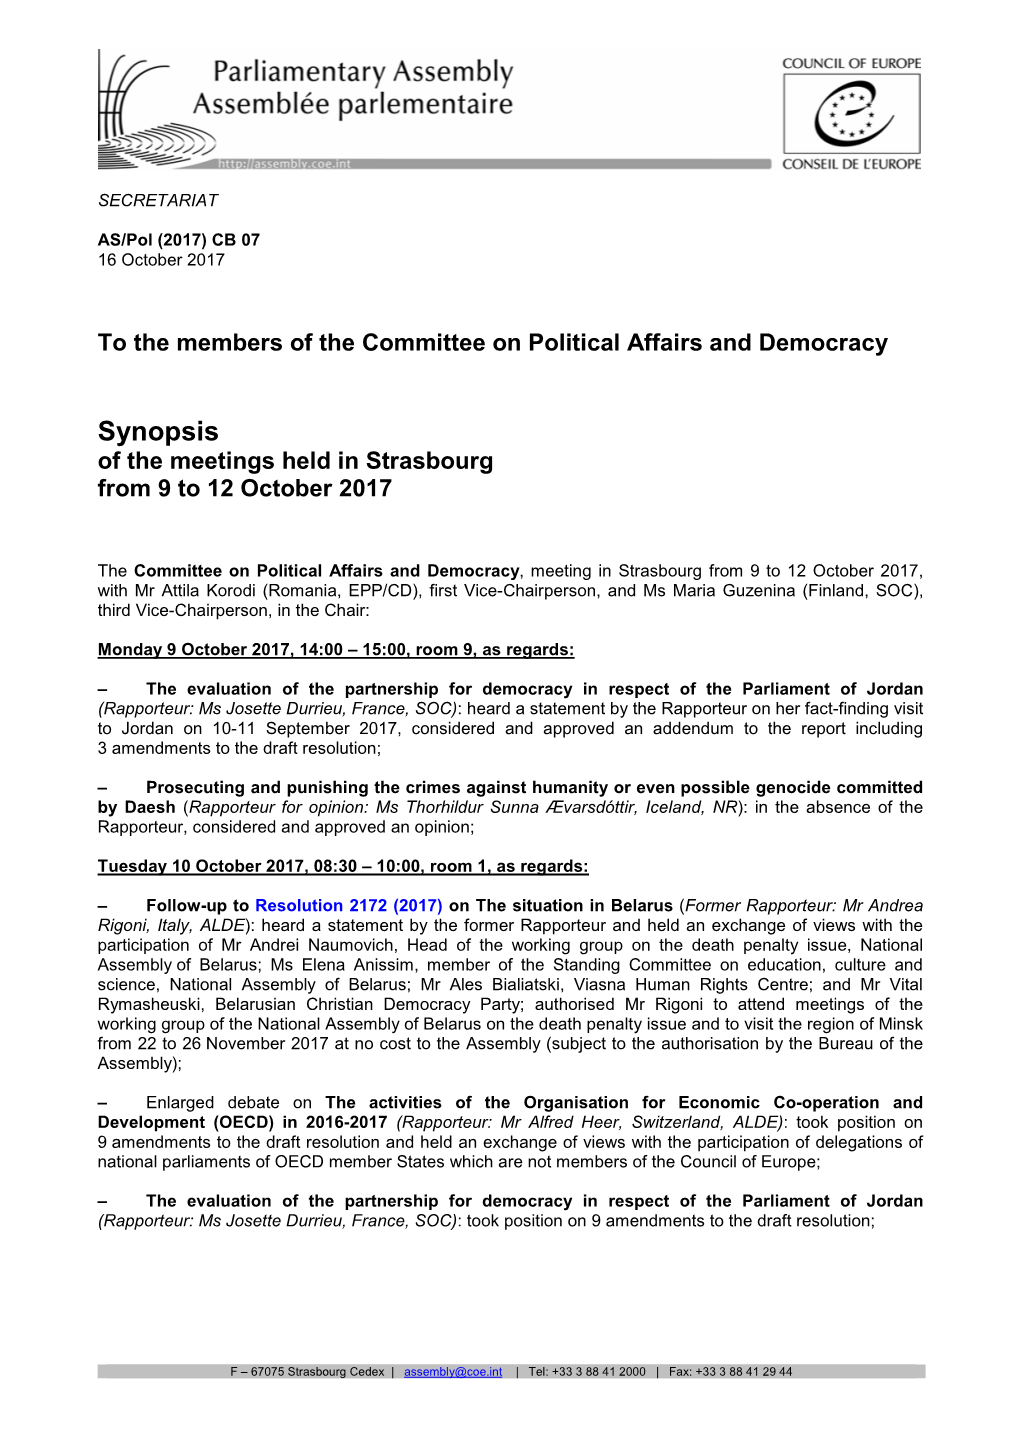 Synopsis of the Meetings Held in Strasbourg from 9 to 12 October 2017